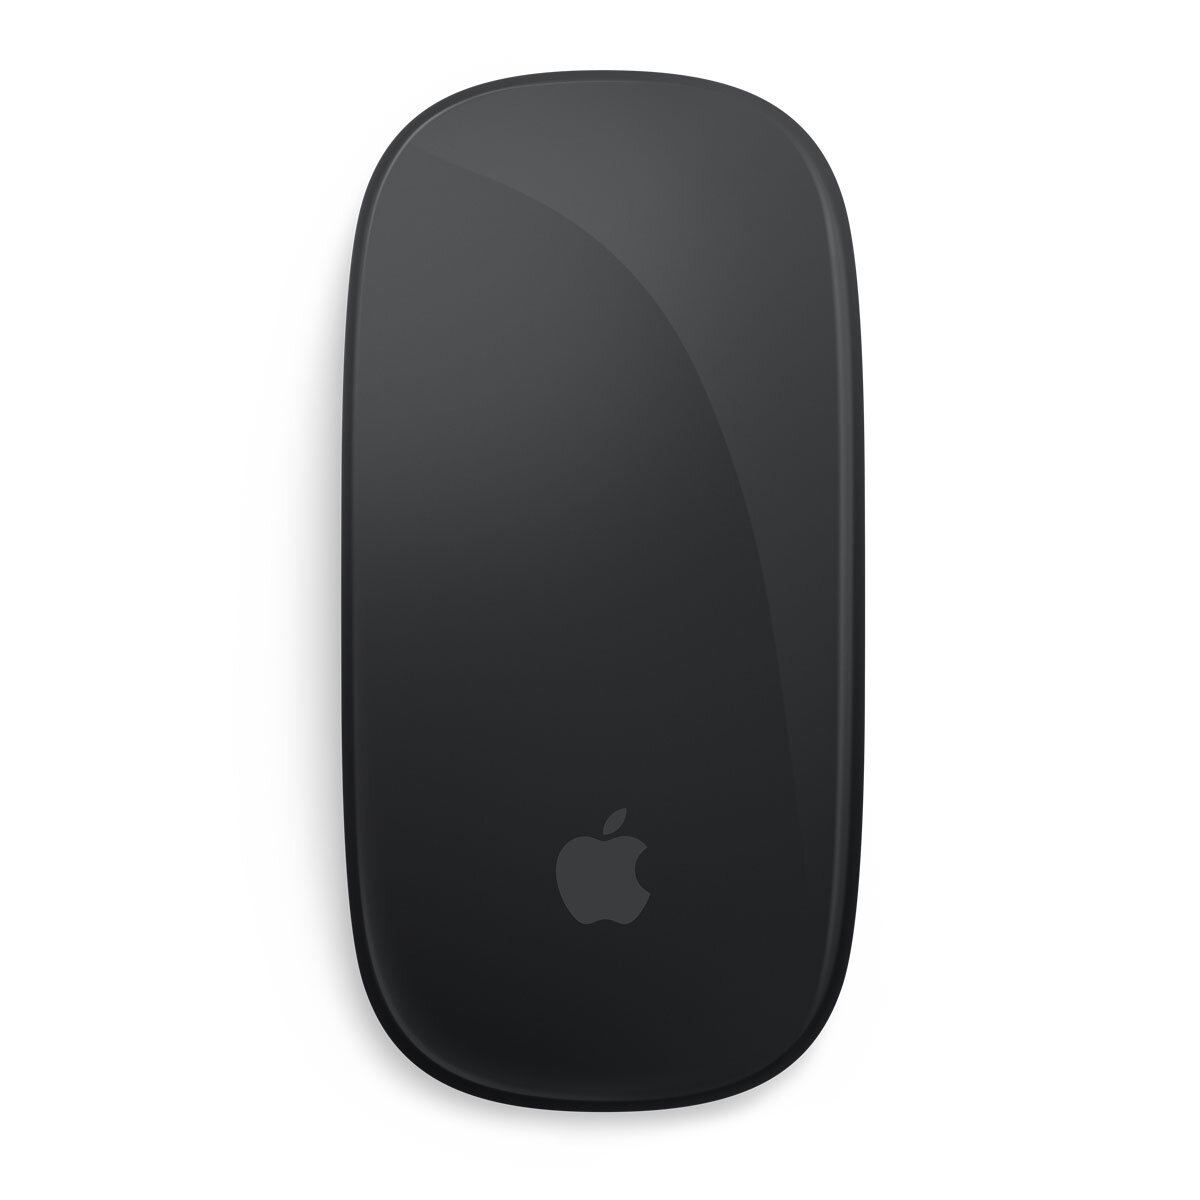 Buy Apple Magic Mouse - Black Multi-Touch Surface, MMMQ3Z/A at costco.co.uk